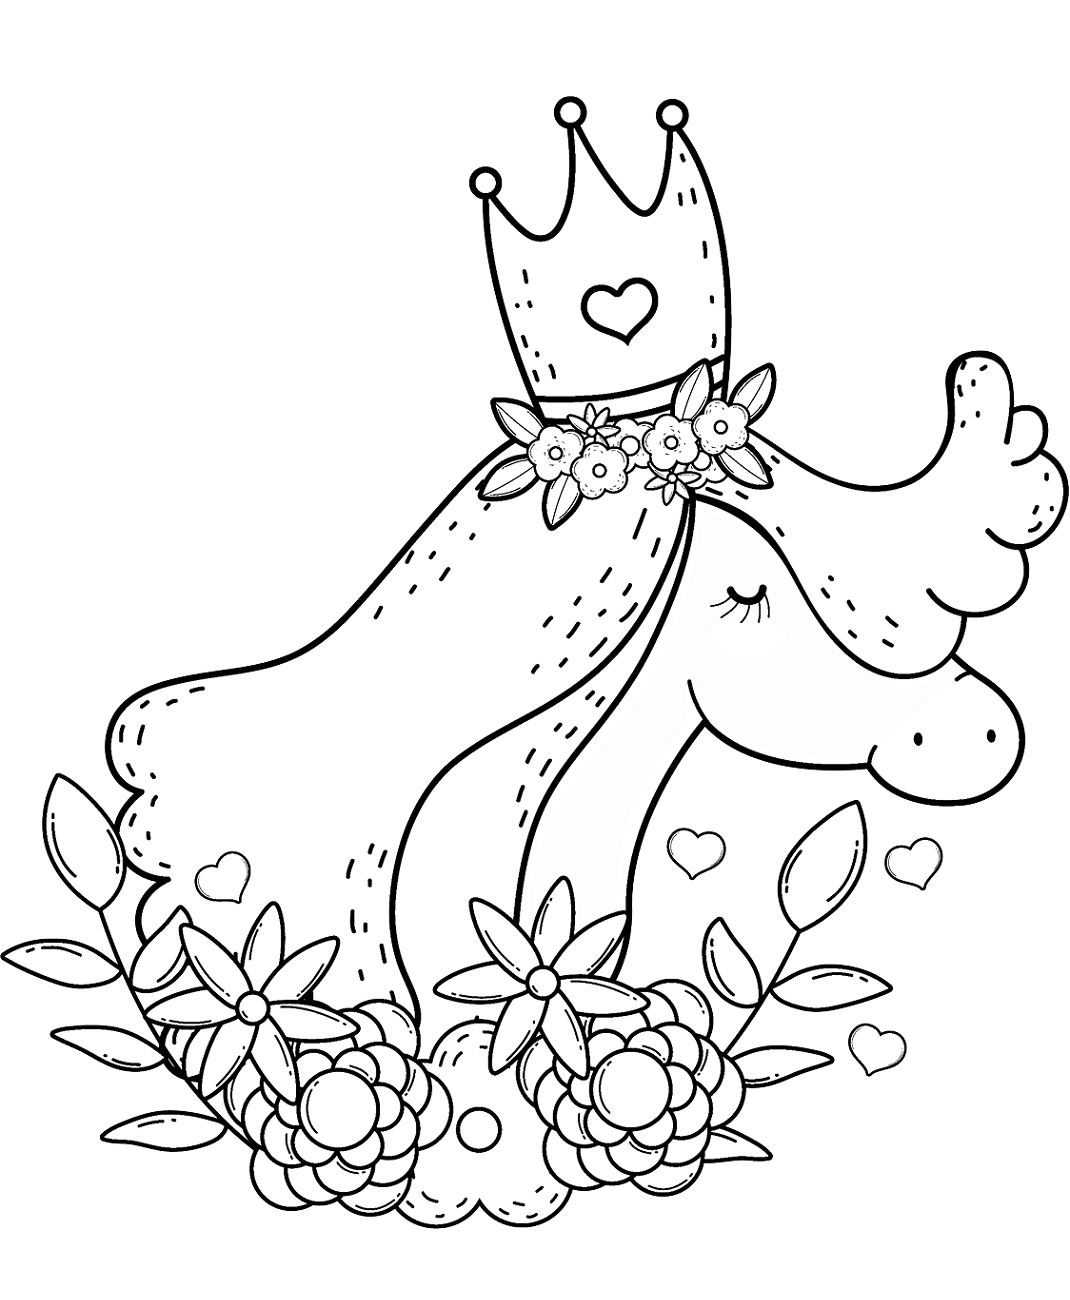 Sweet Unicorn Coloring Page - Free Printable Coloring Pages for Kids